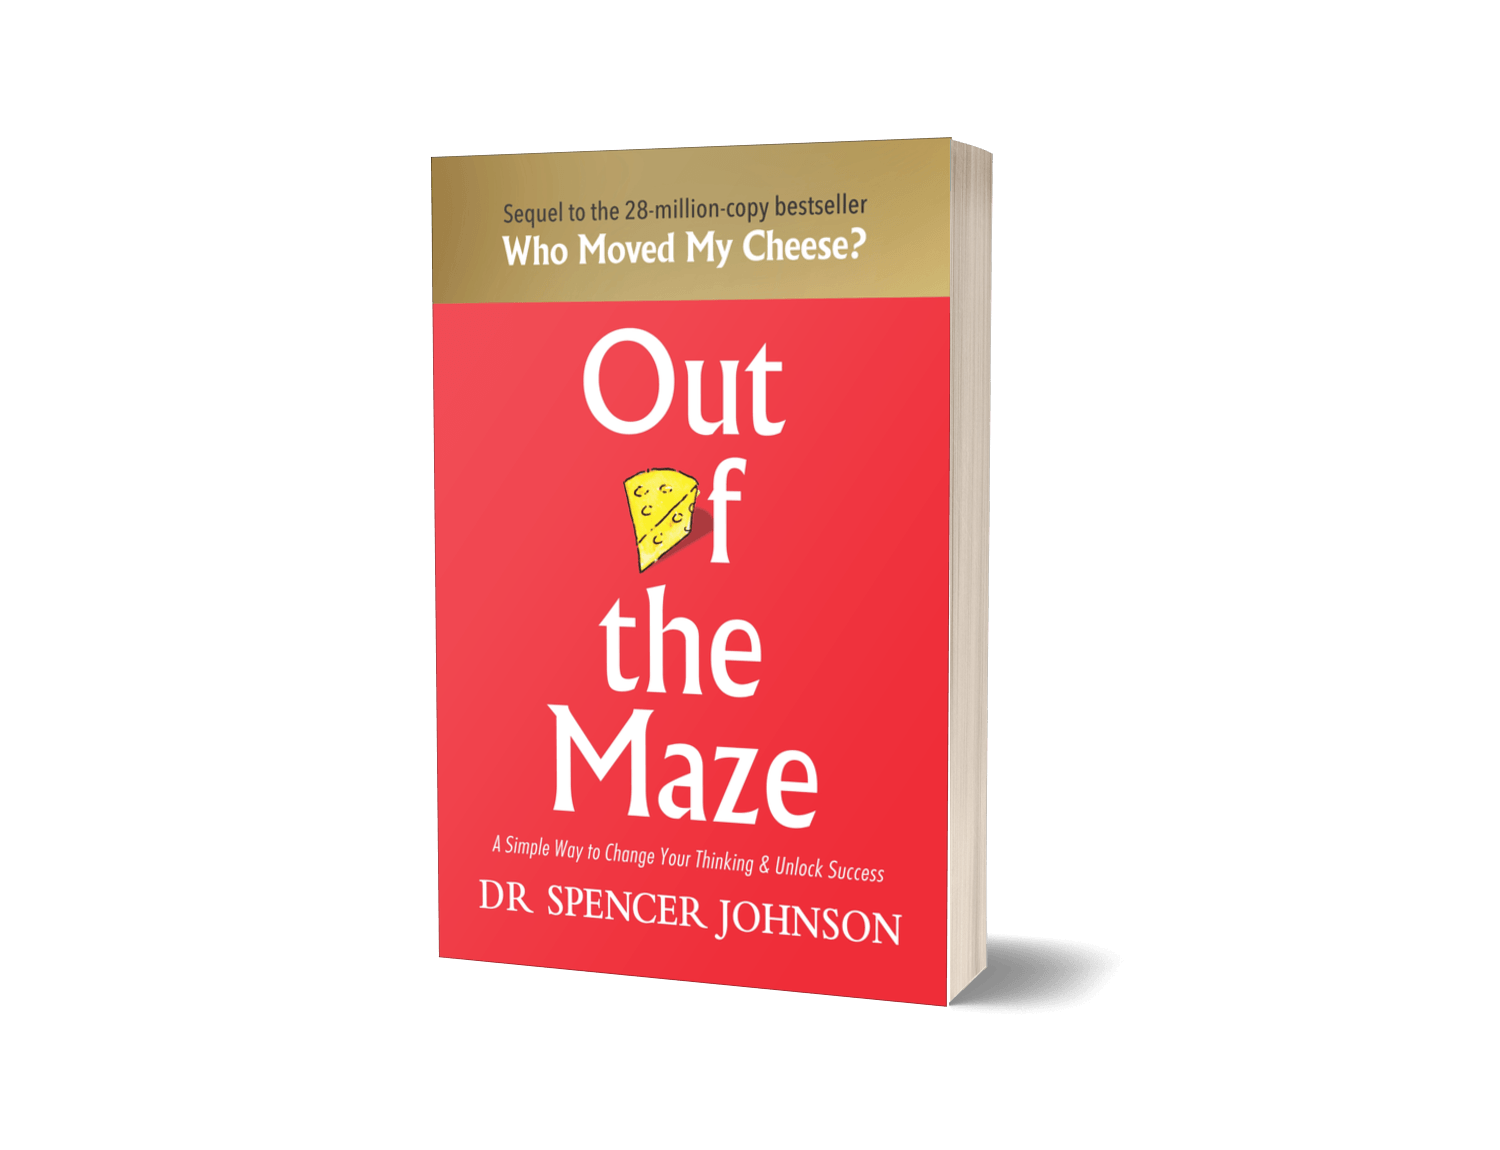 Out of the Maze by Dr Spencer Johnson